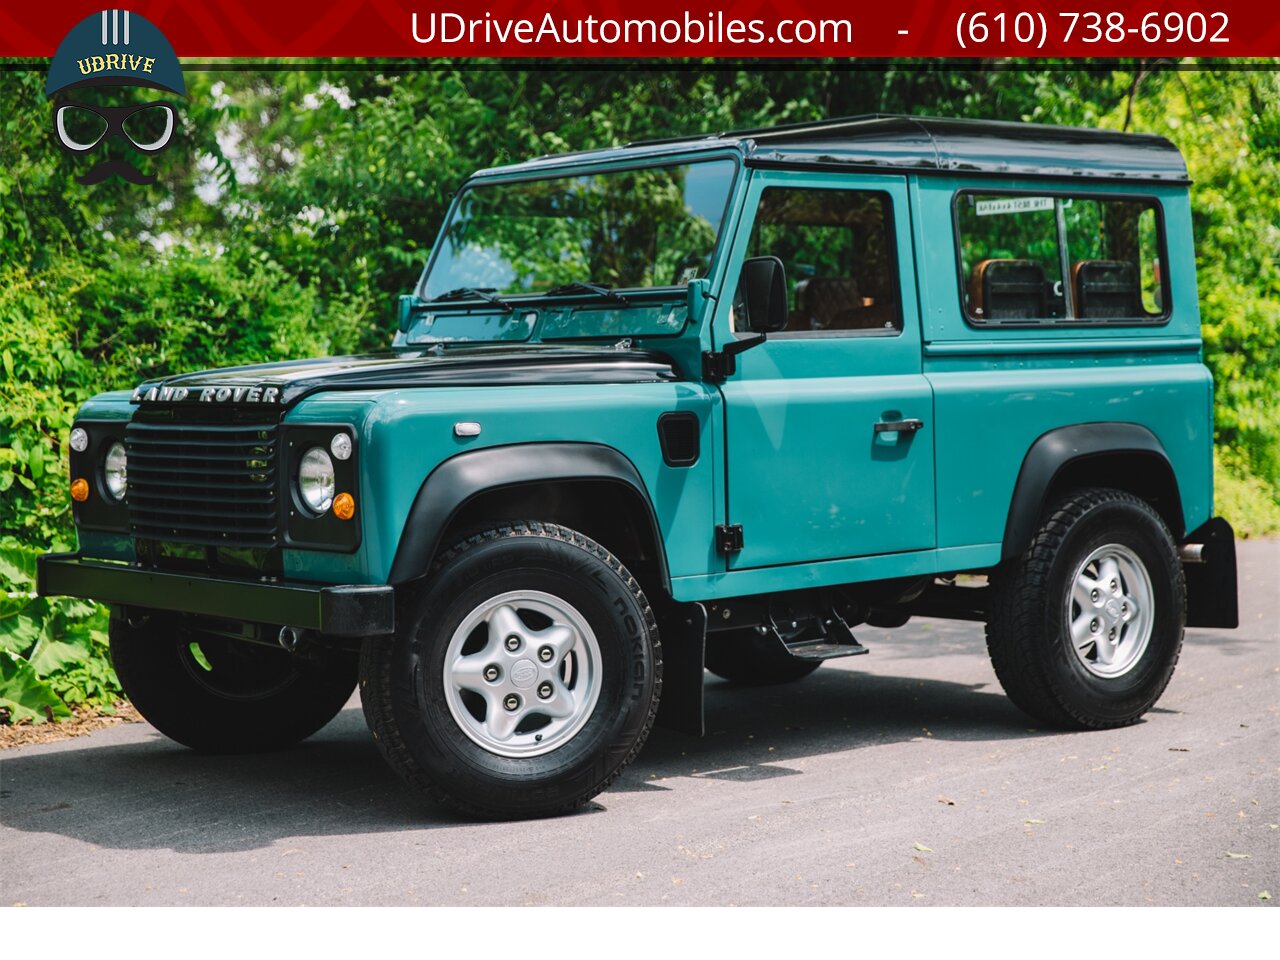 1986 Land Rover Defender 90 D90 4.0L V8 5 Speed Manual New Interior  $25k Recent Engine Build - Photo 1 - West Chester, PA 19382